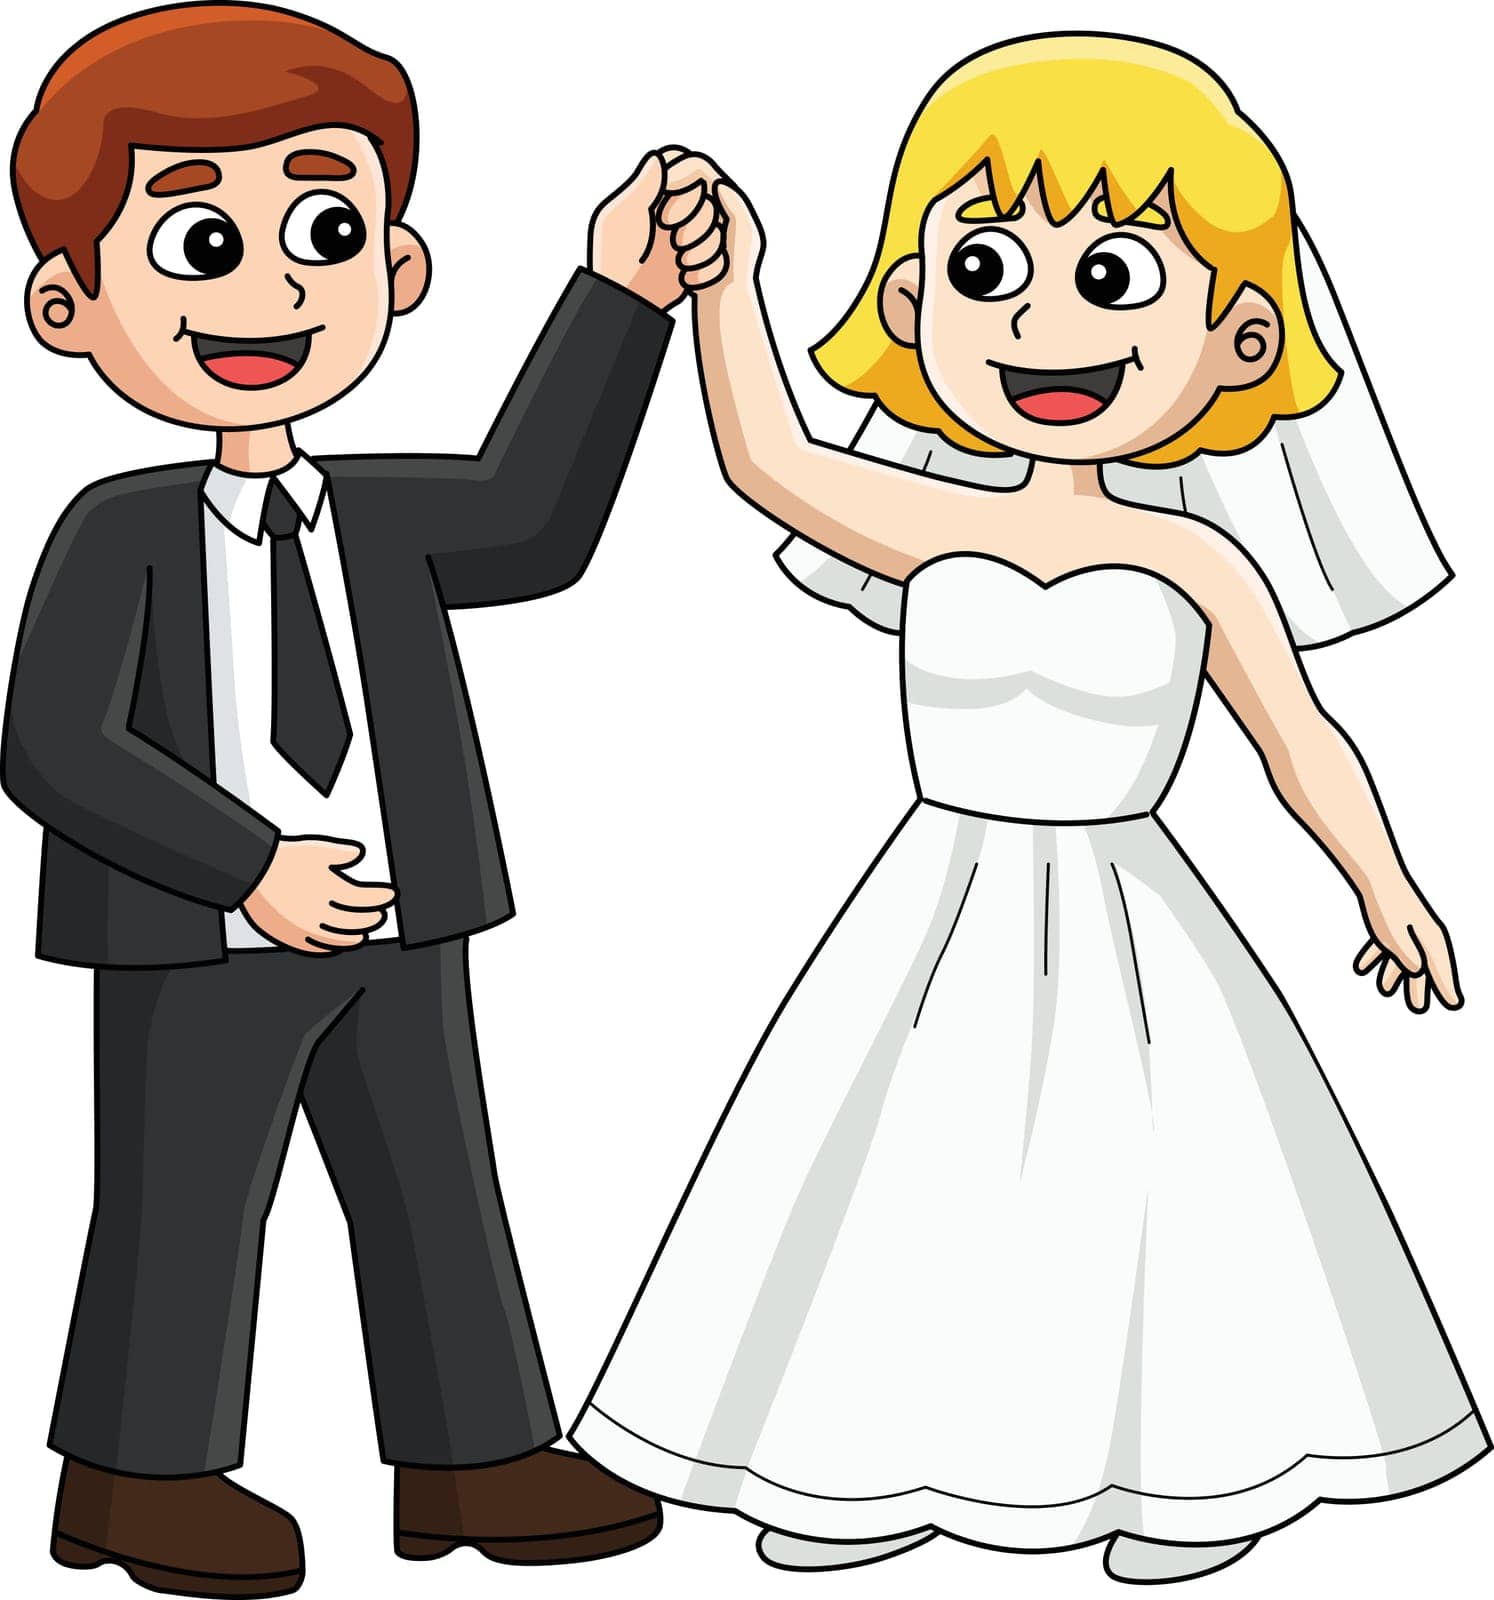 This cartoon clipart shows a Wedding Groom And Bride Dancing illustration.